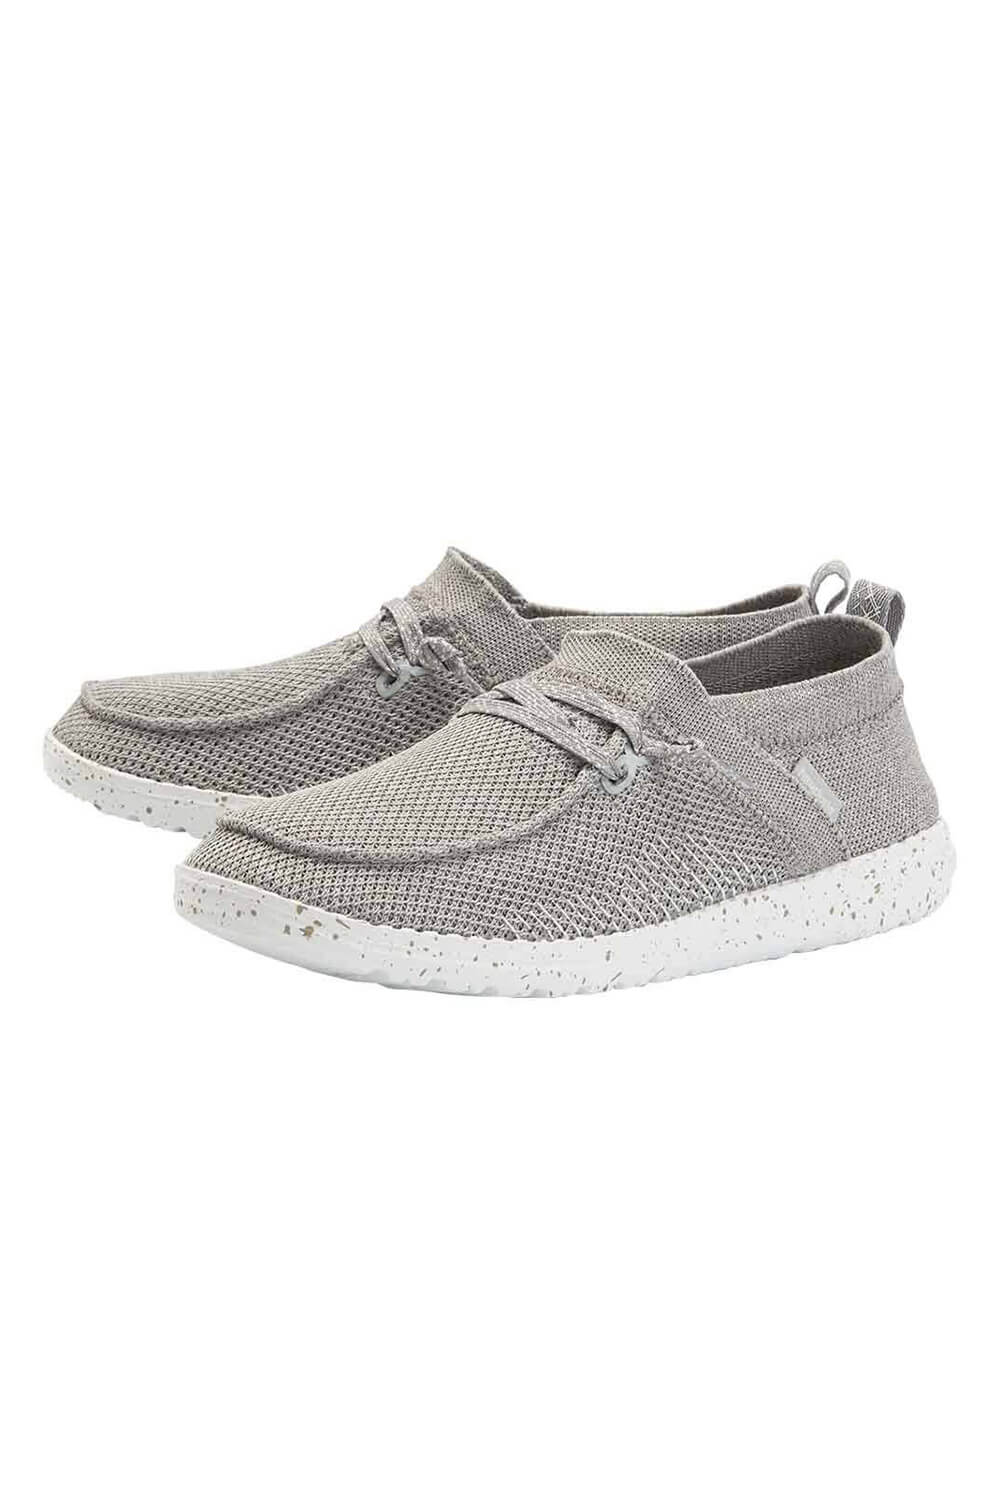 HEYDUDE Women's Wendy Halo Shoes in Grey